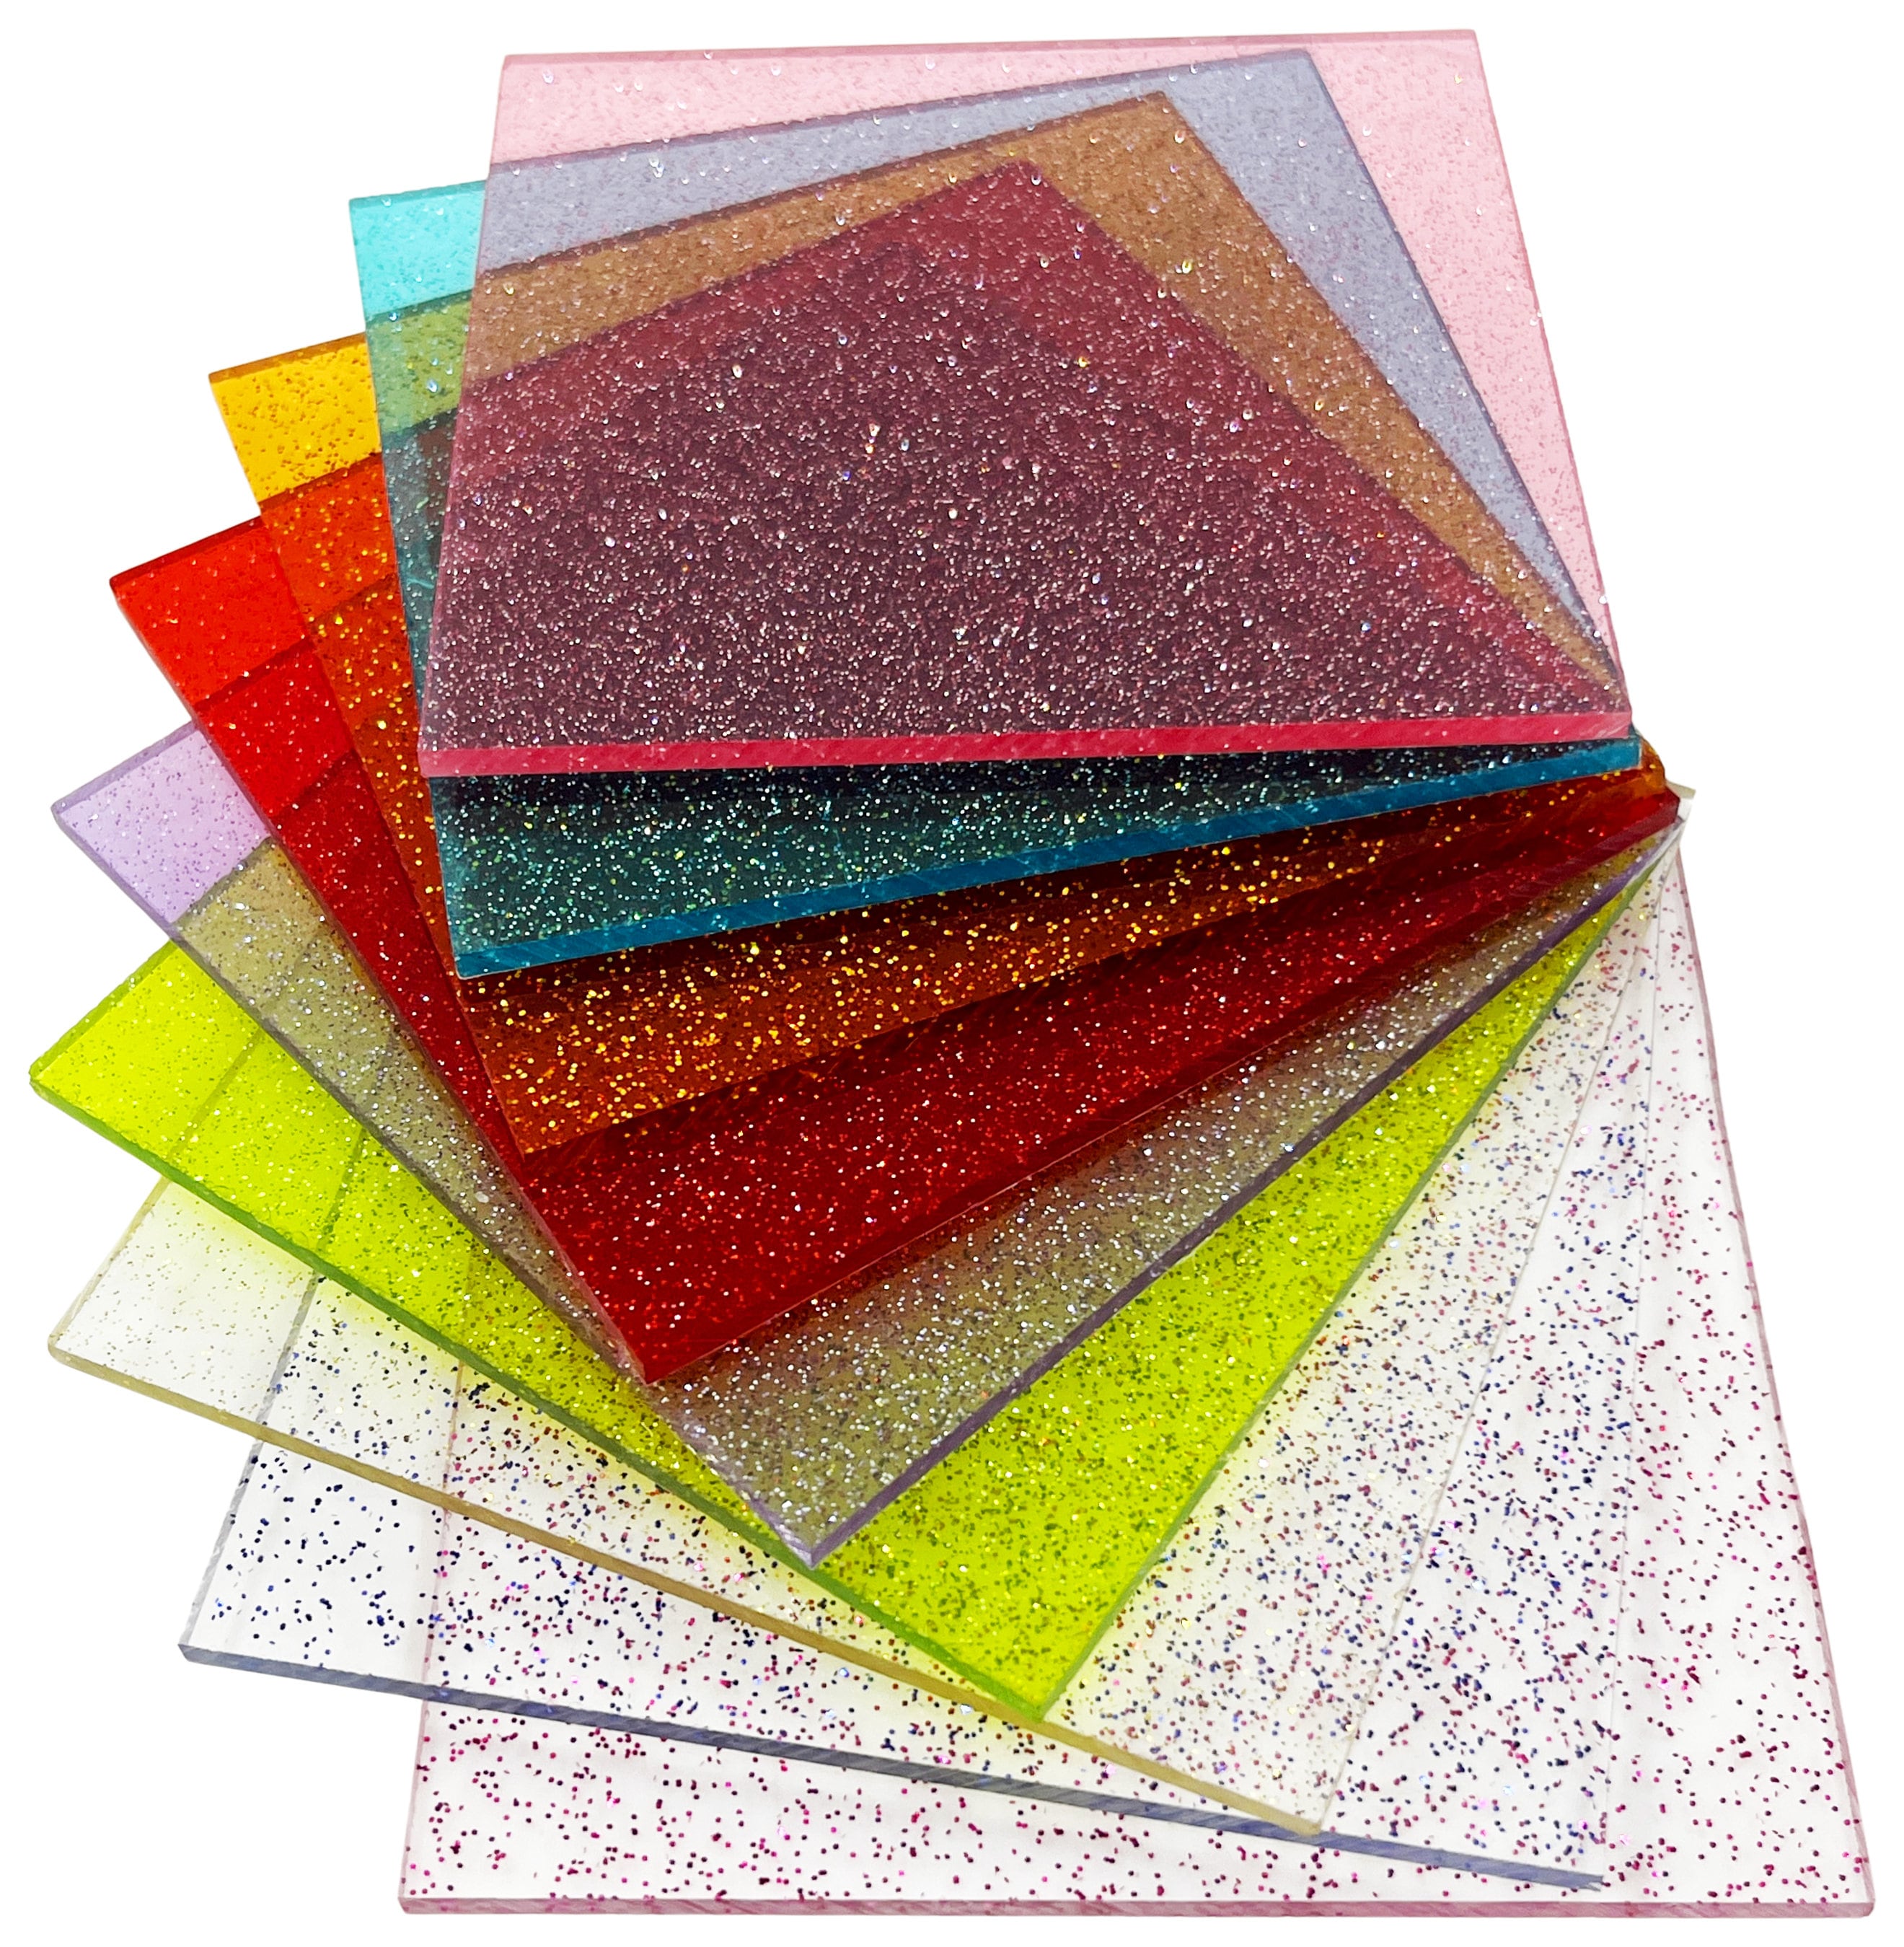 GLITTER Acrylic Perspex Sheet Panel 【Up to 20% OFF】【BEST Price】FREE POST